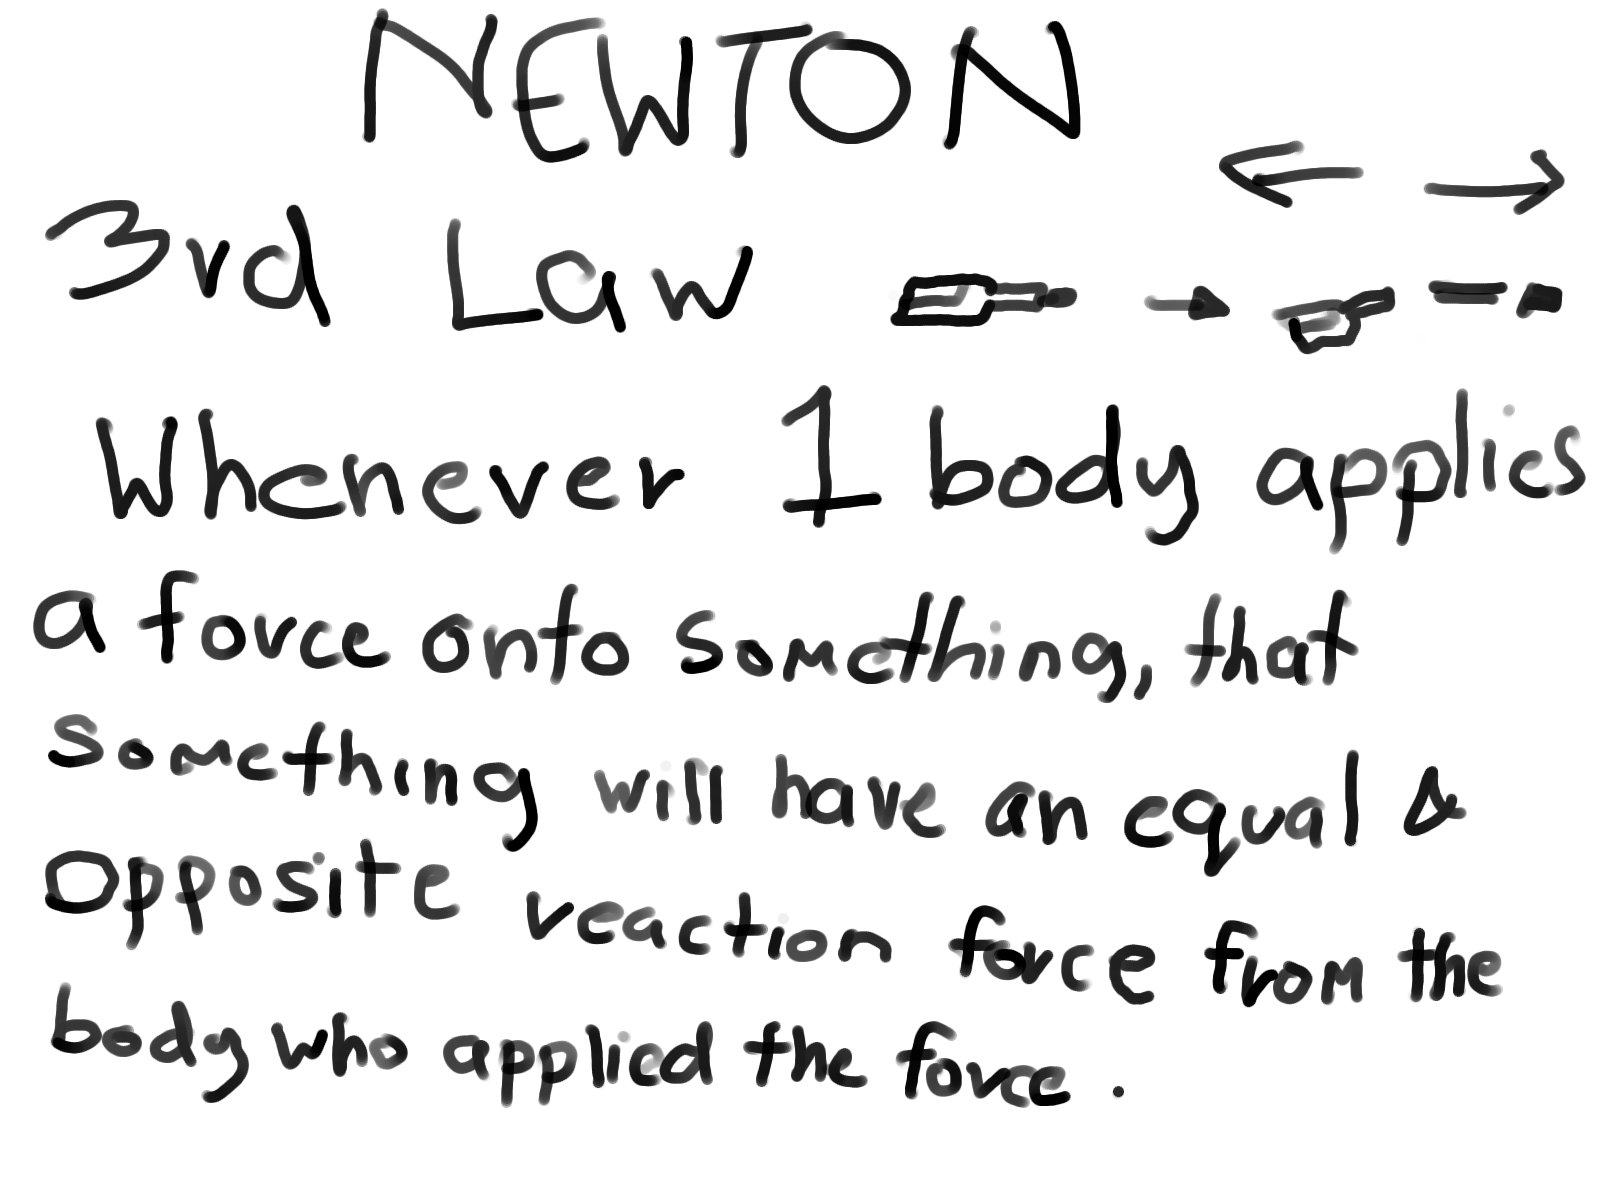 EASY SCIENCE NOTES: Newton 3rd law of motion